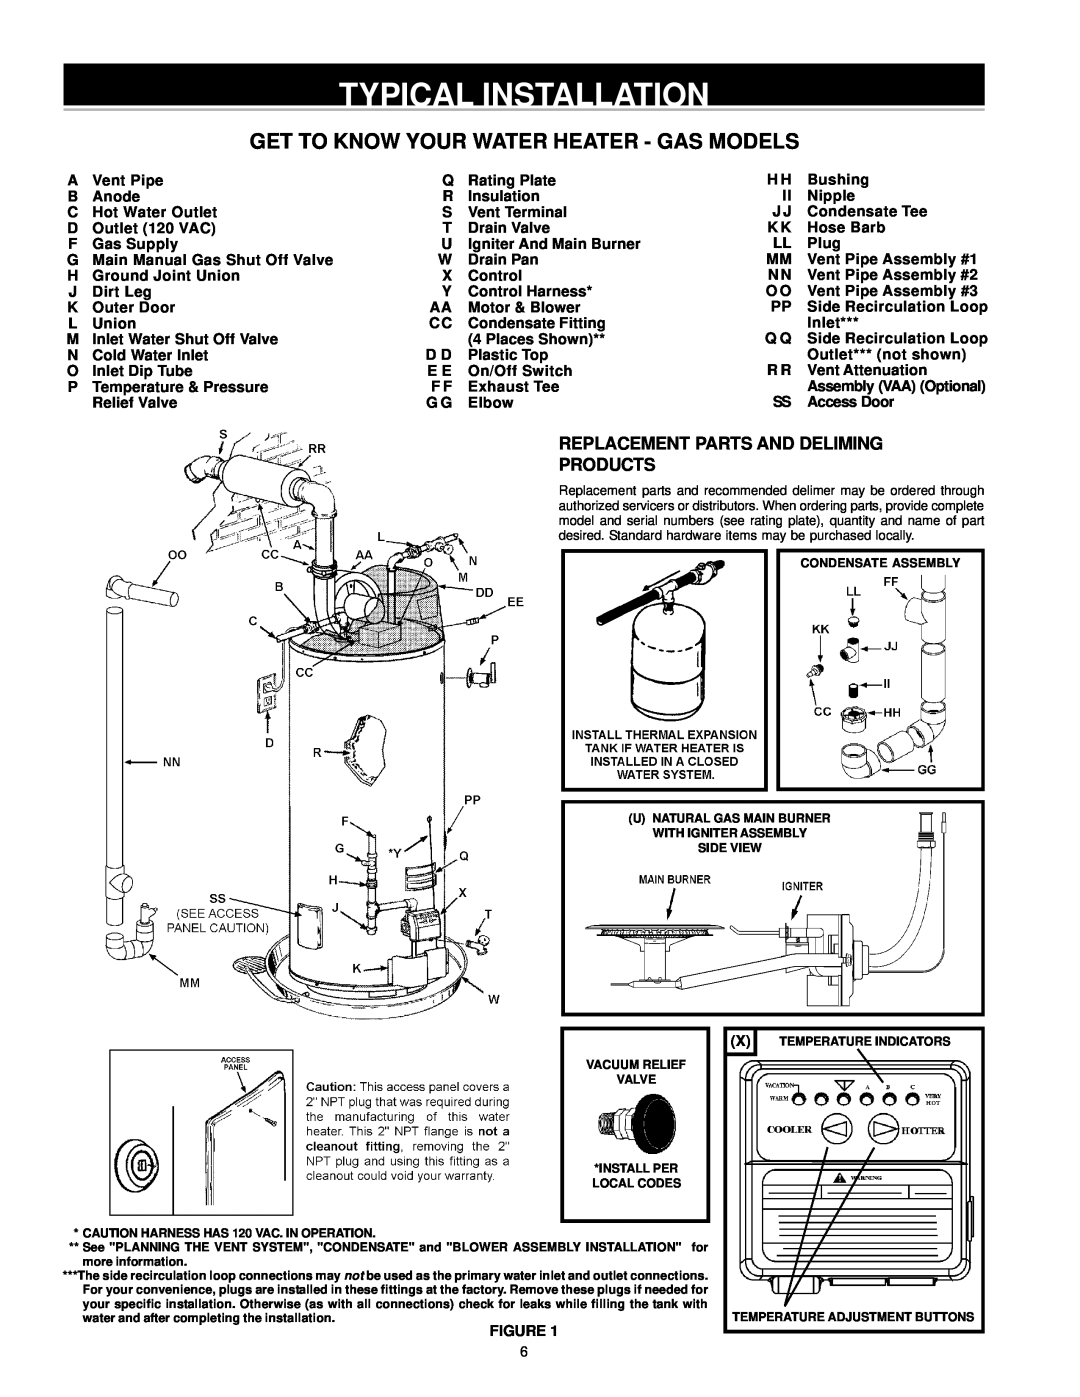 A.O. Smith ARGSS02708 Typical Installation, Get To Know Your Water Heater - Gas Models, Vent Pipe, Rating Plate, Bushing 